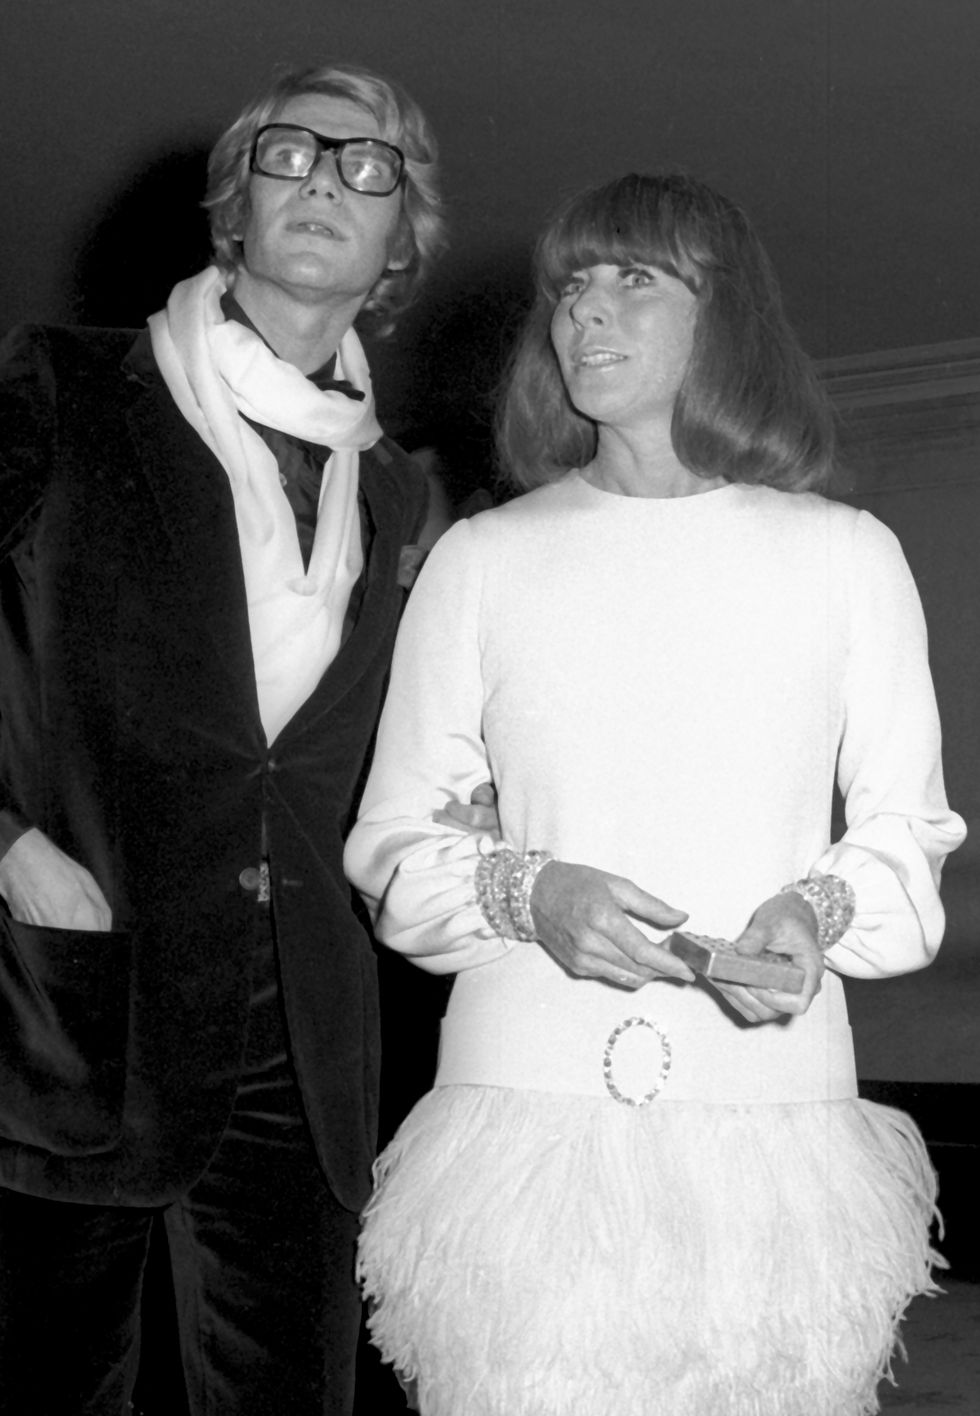 paris, france   october 14  yves saint laurent and helene rochas attend phedre performance on october 14, 1968 at gala au theatre de lopera in paris, france photo by ron galellaron galella collection via getty images